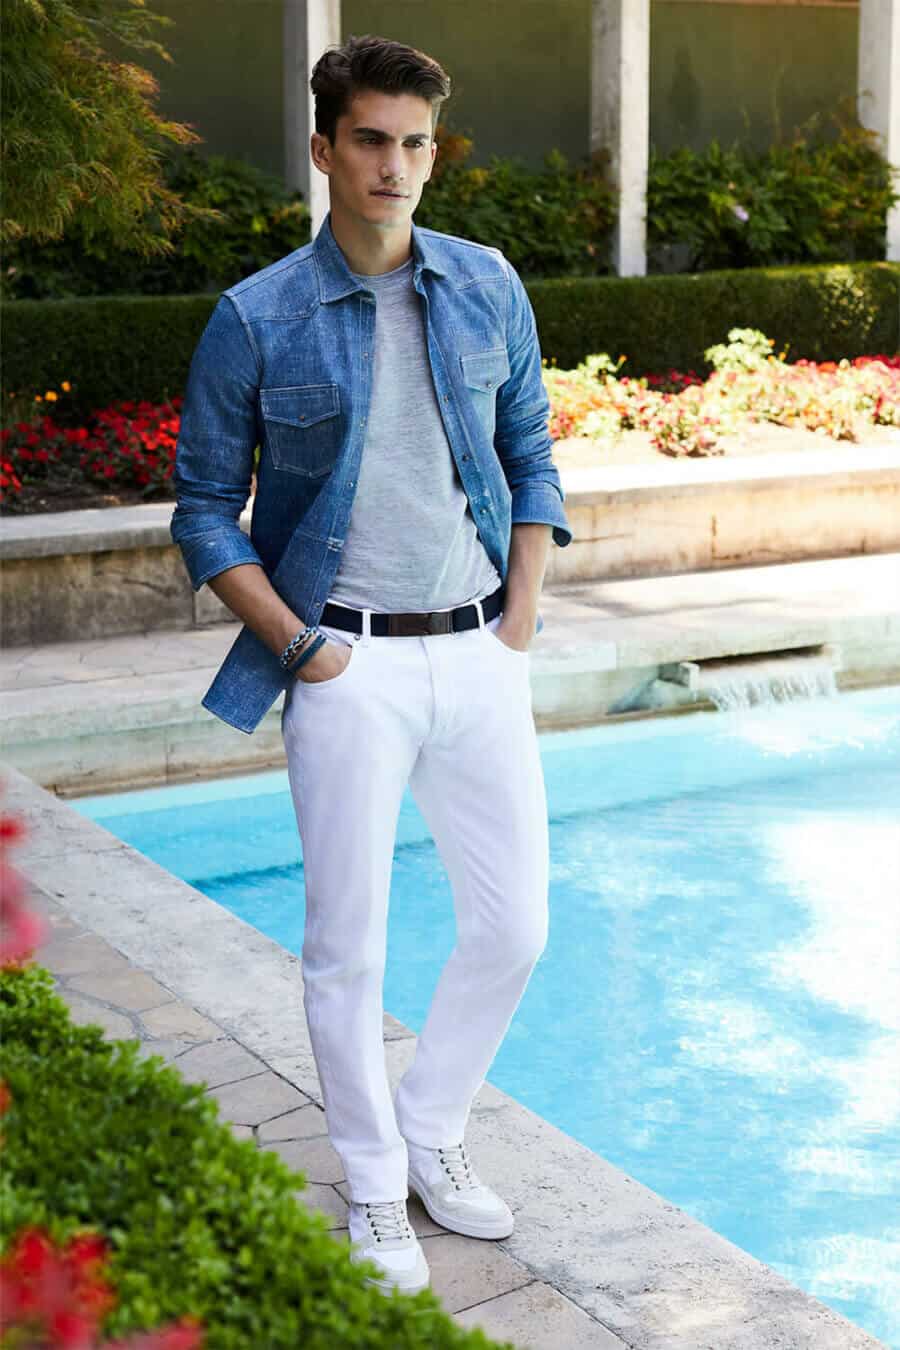 Spring double denim outfit for men - white jeans and mid blue shirt